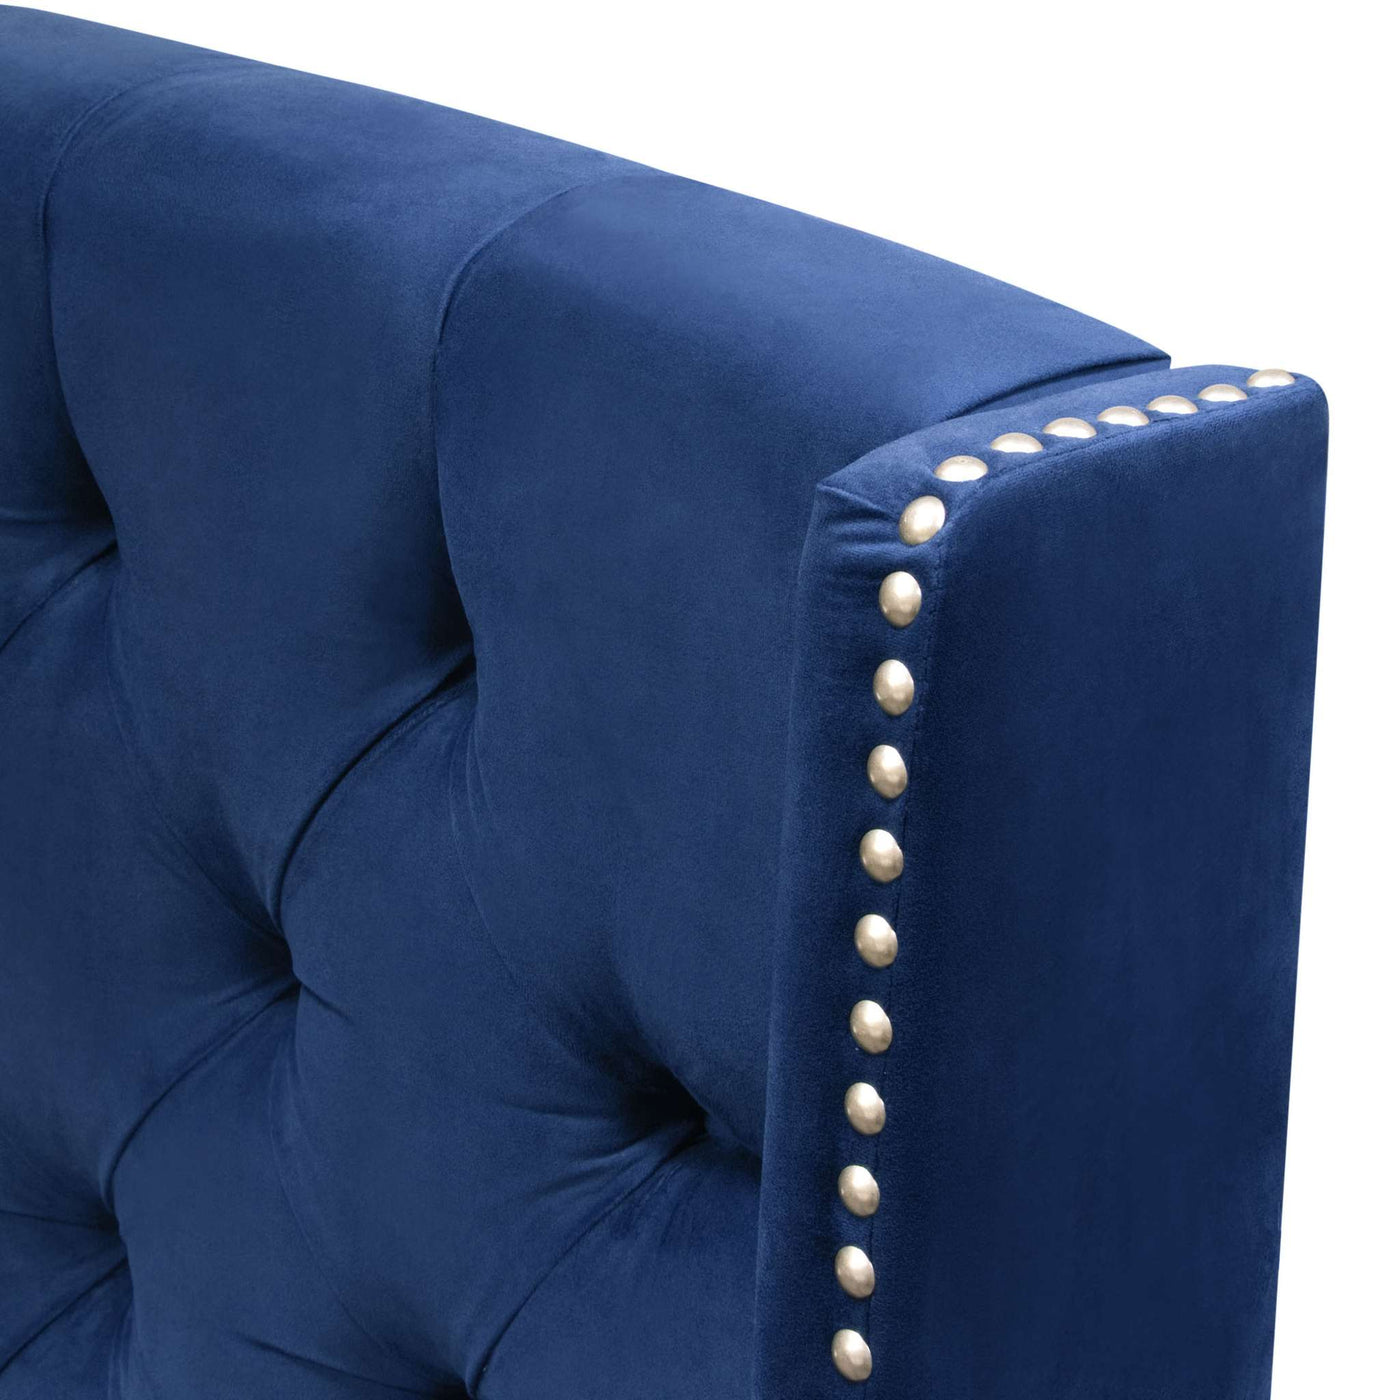 Majestic Tufted Velvet w/ Nail Head Accent by Diamond Sofa